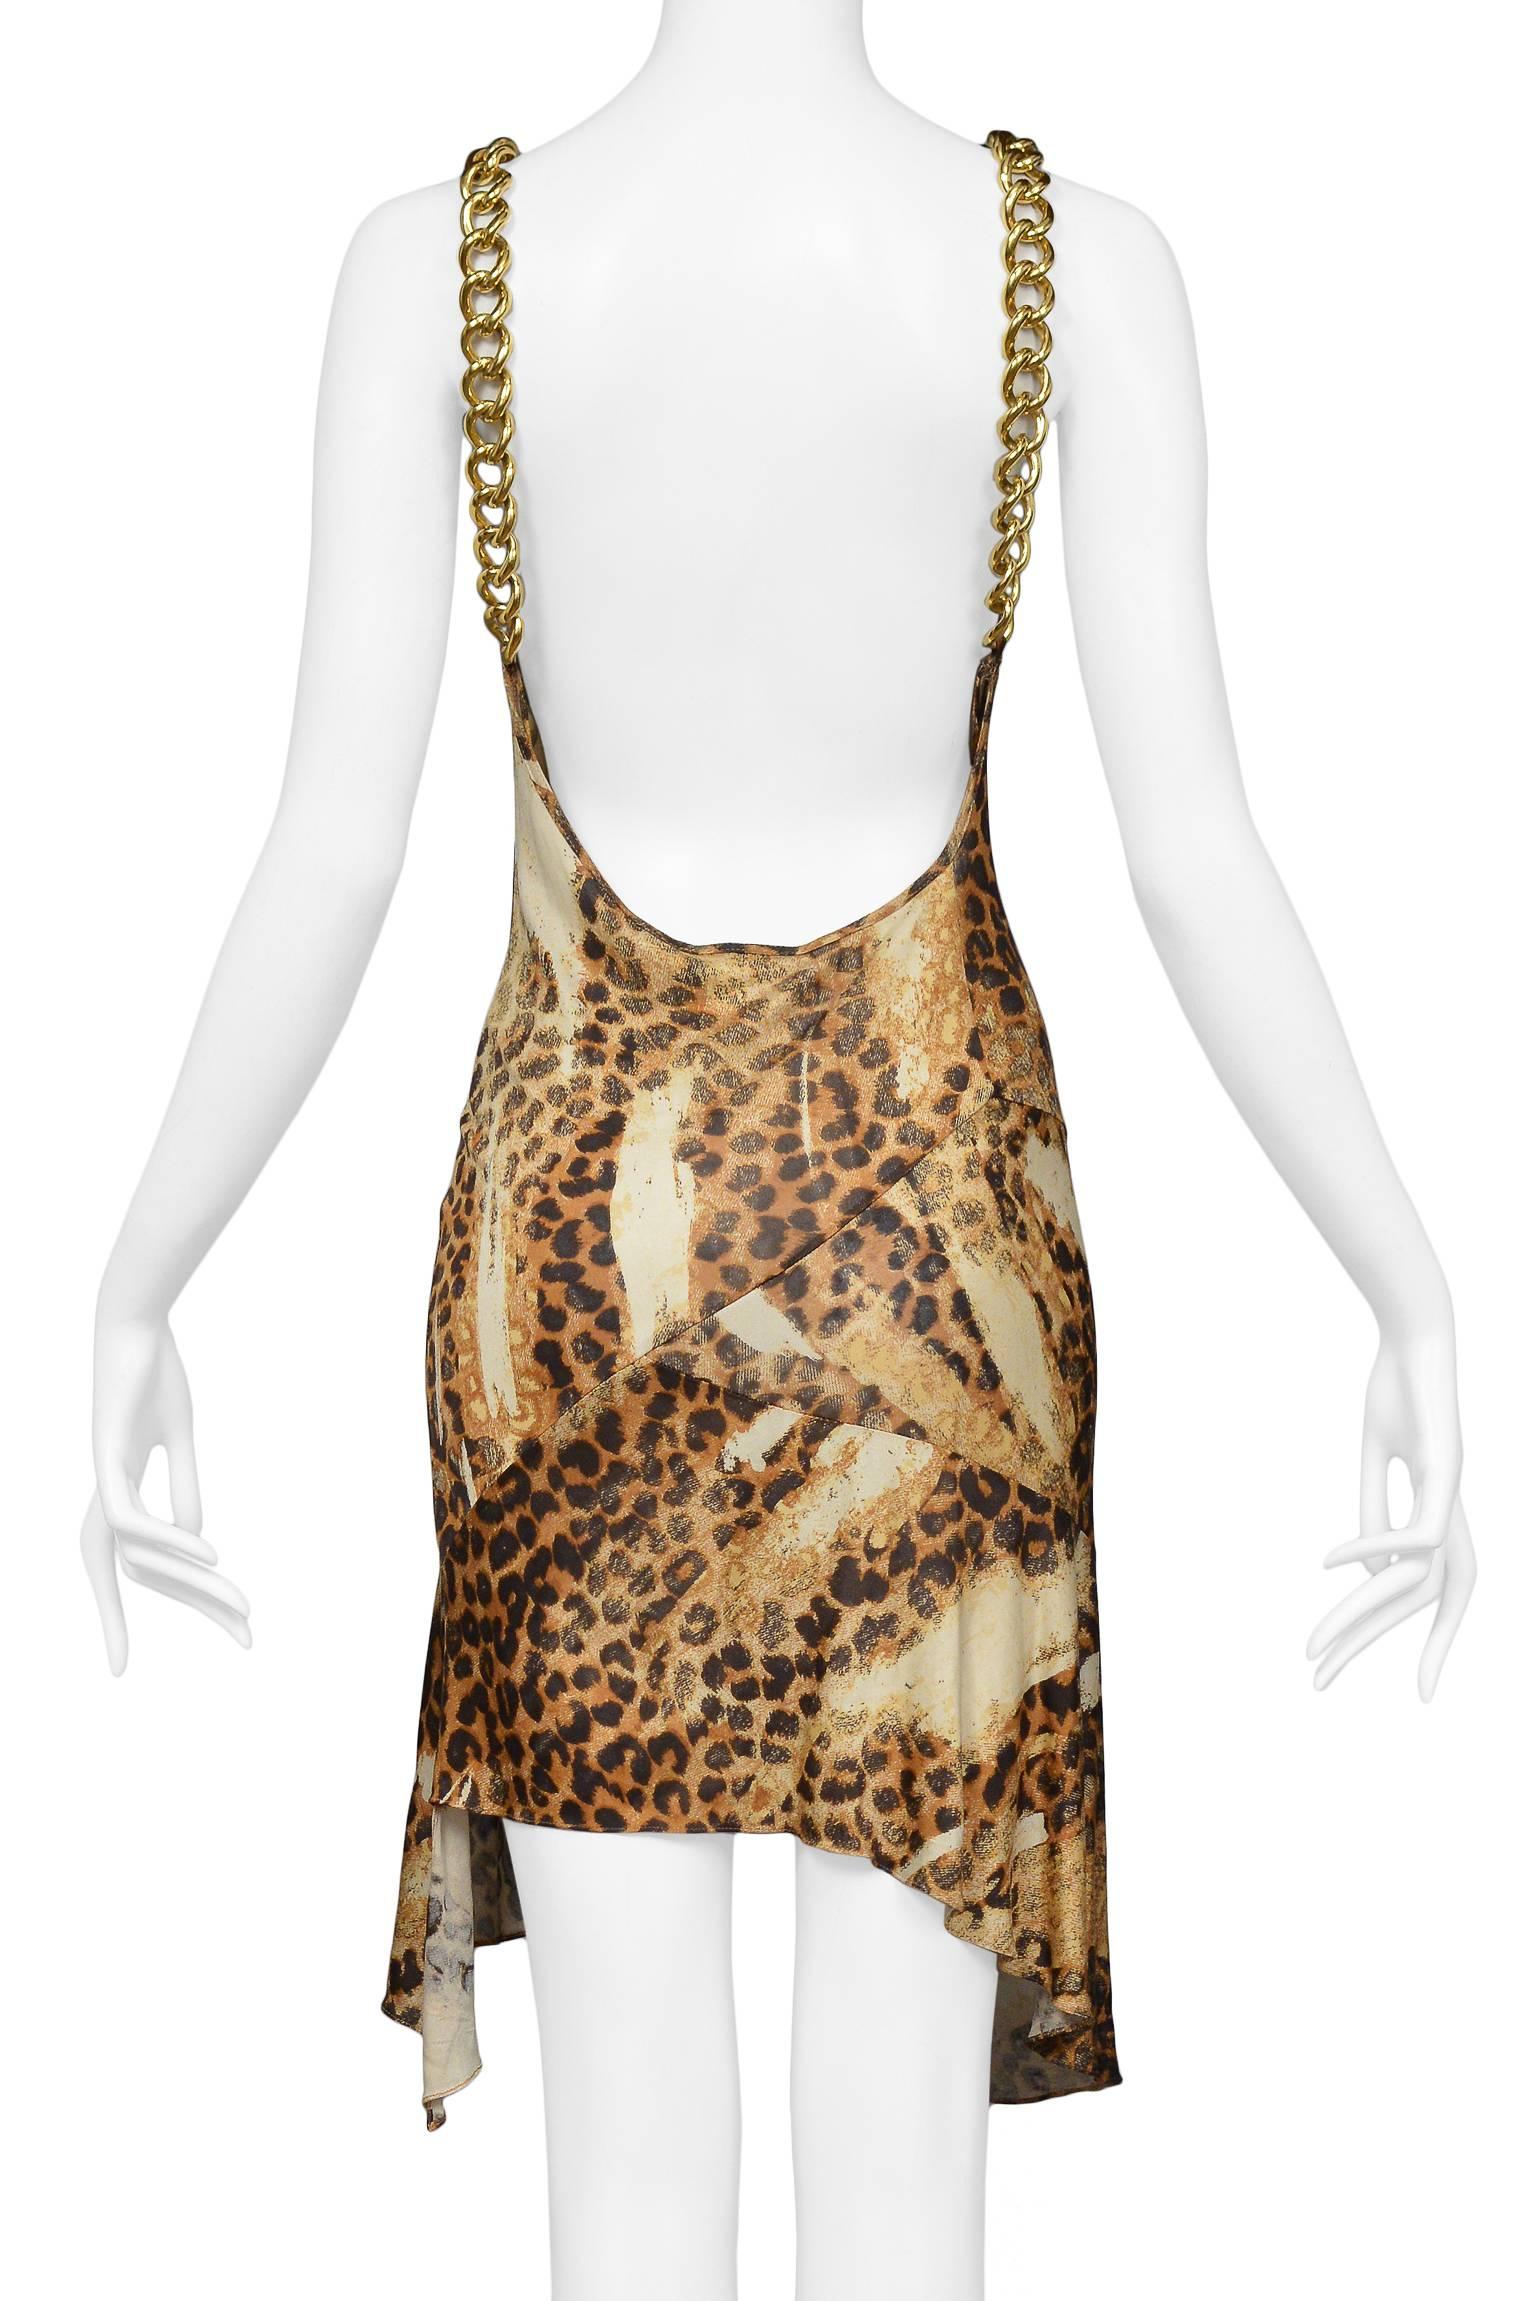 Brown Iconic Dior By Galliano Gold Chain & ID Logo Necklace Leopard Dress Runway 2000